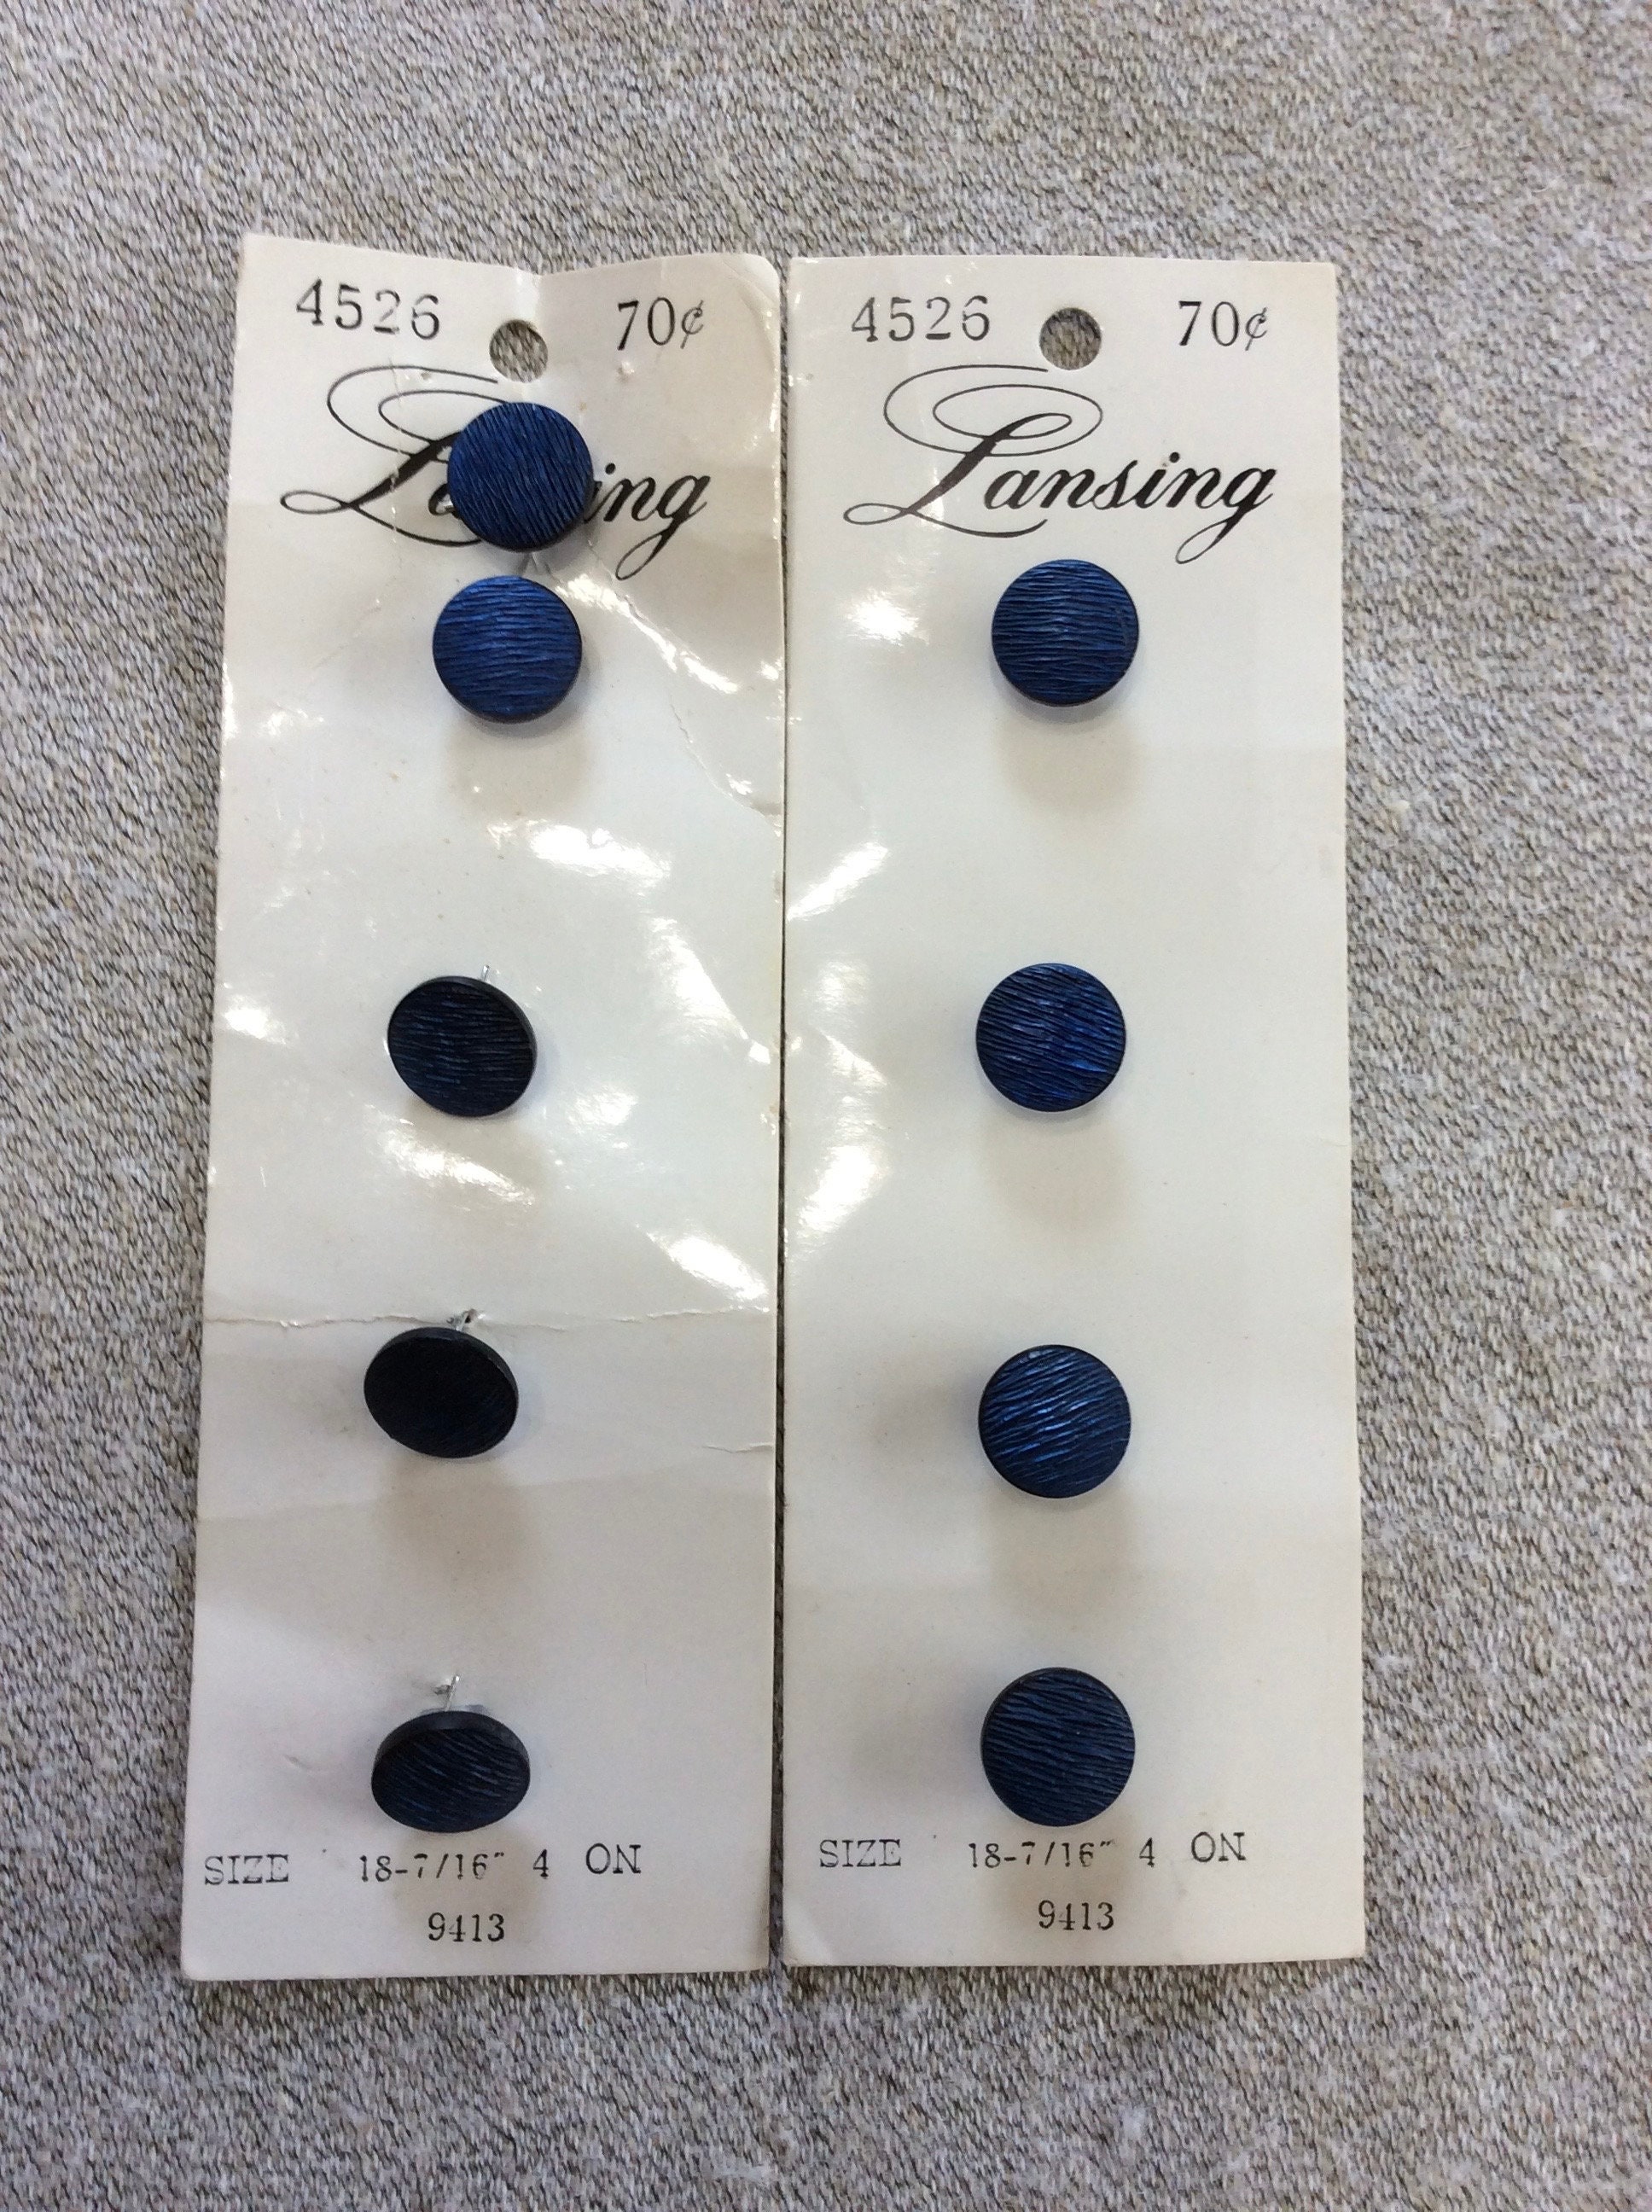 Blumenthal Lansing Pearl Buttons, 3 Pack